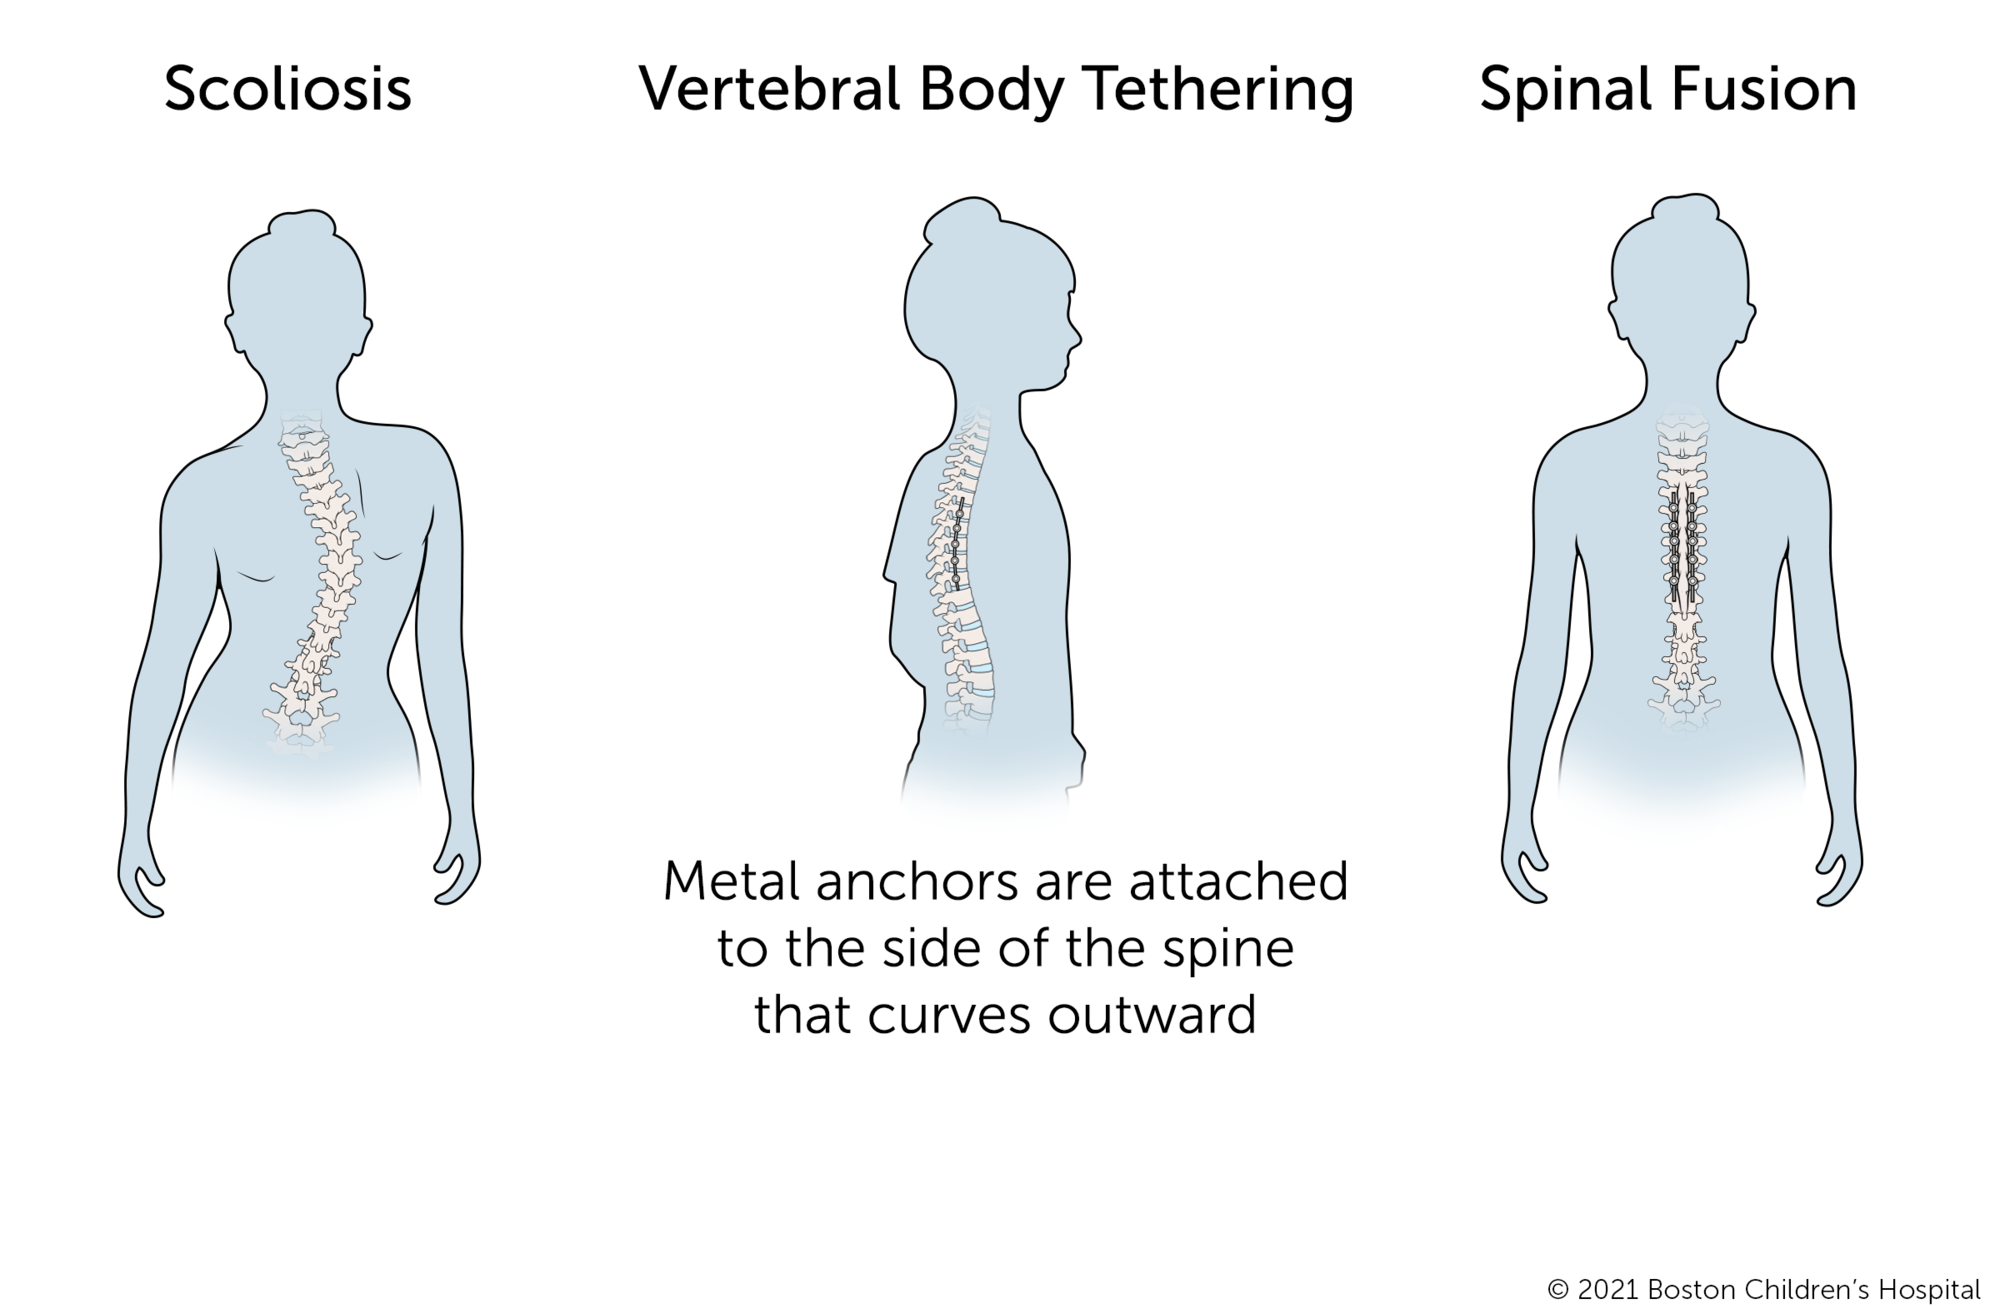 Vertebral body tethering is a new procedure for mild scoliosis. Metal anchors and a flexible tether are attached to the side of the spine that curves outward. By comparison, for spinal fusion surgery, metal anchors and stiff rods are attached to both sides of the spine.